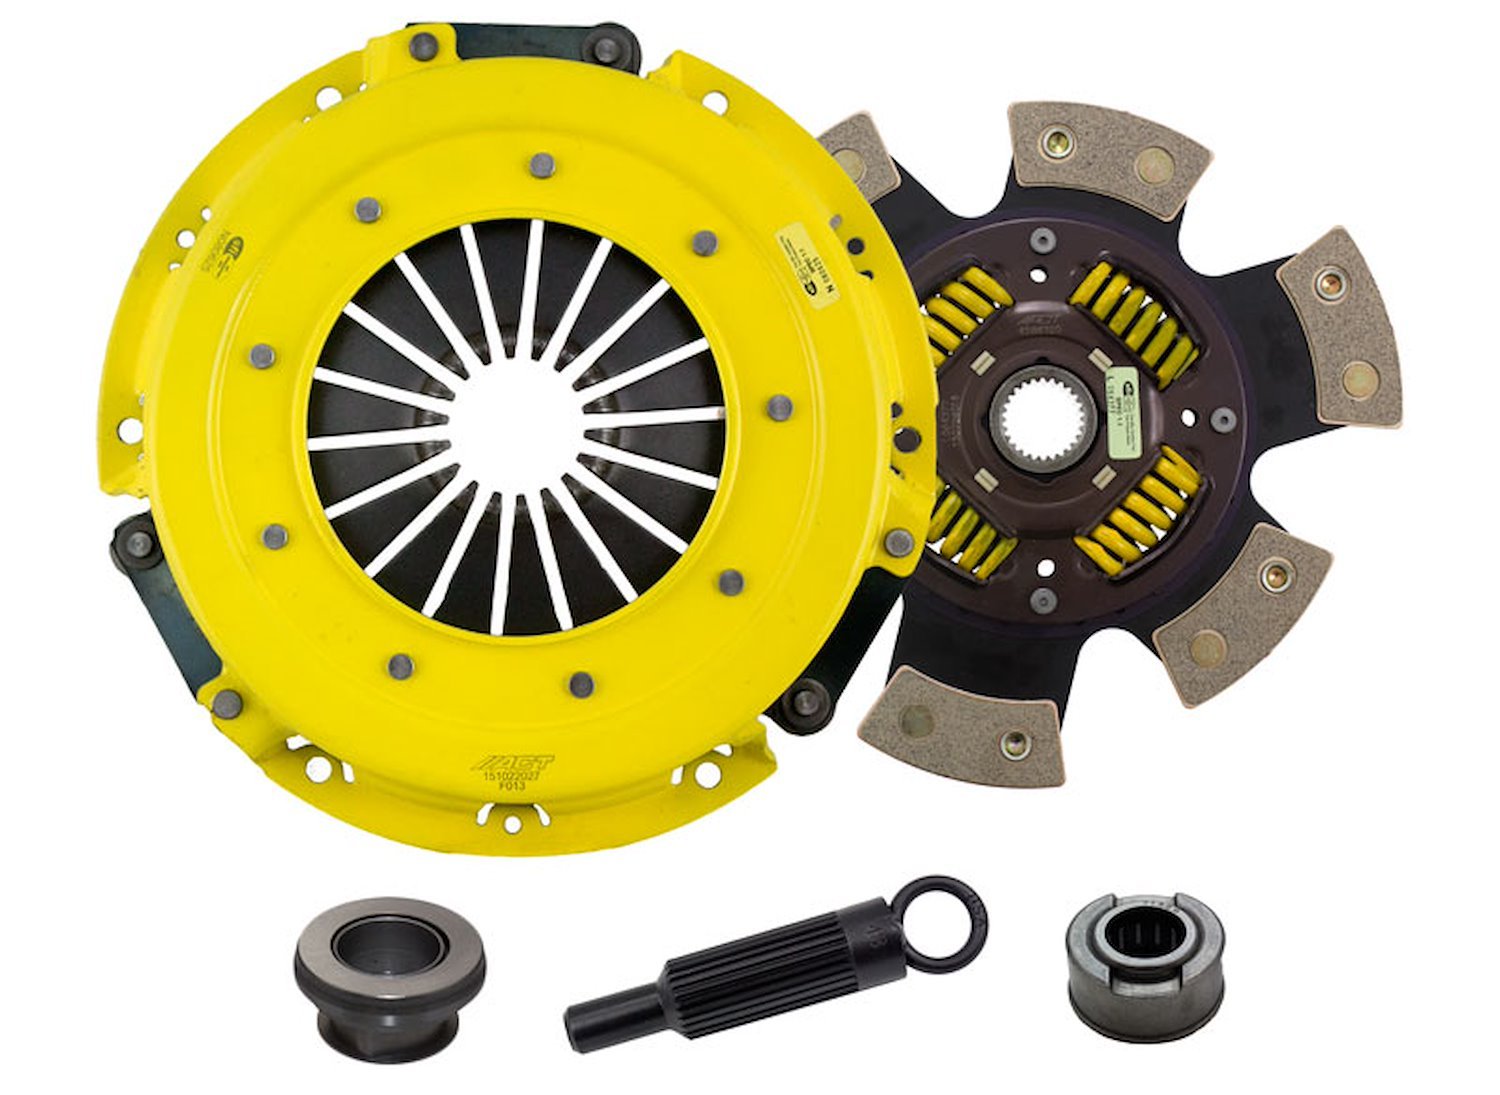 HD/Race Sprung 6-Pad Transmission Clutch Kit Fits Select Ford/Lincoln/Mercury/Mazda